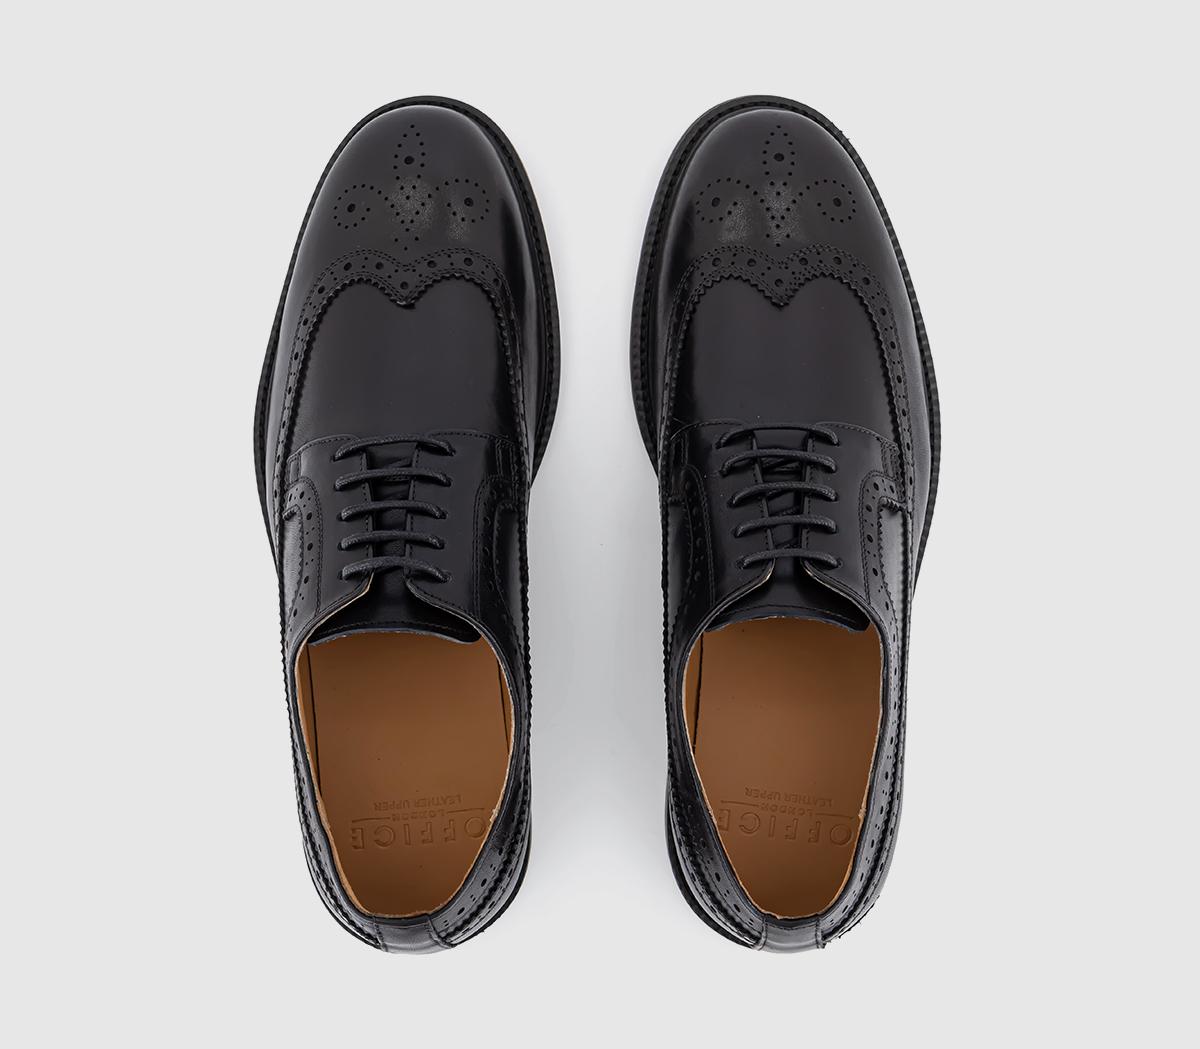 OFFICE Mackay Longwing Brogues Black Leather - Men’s Smart Shoes